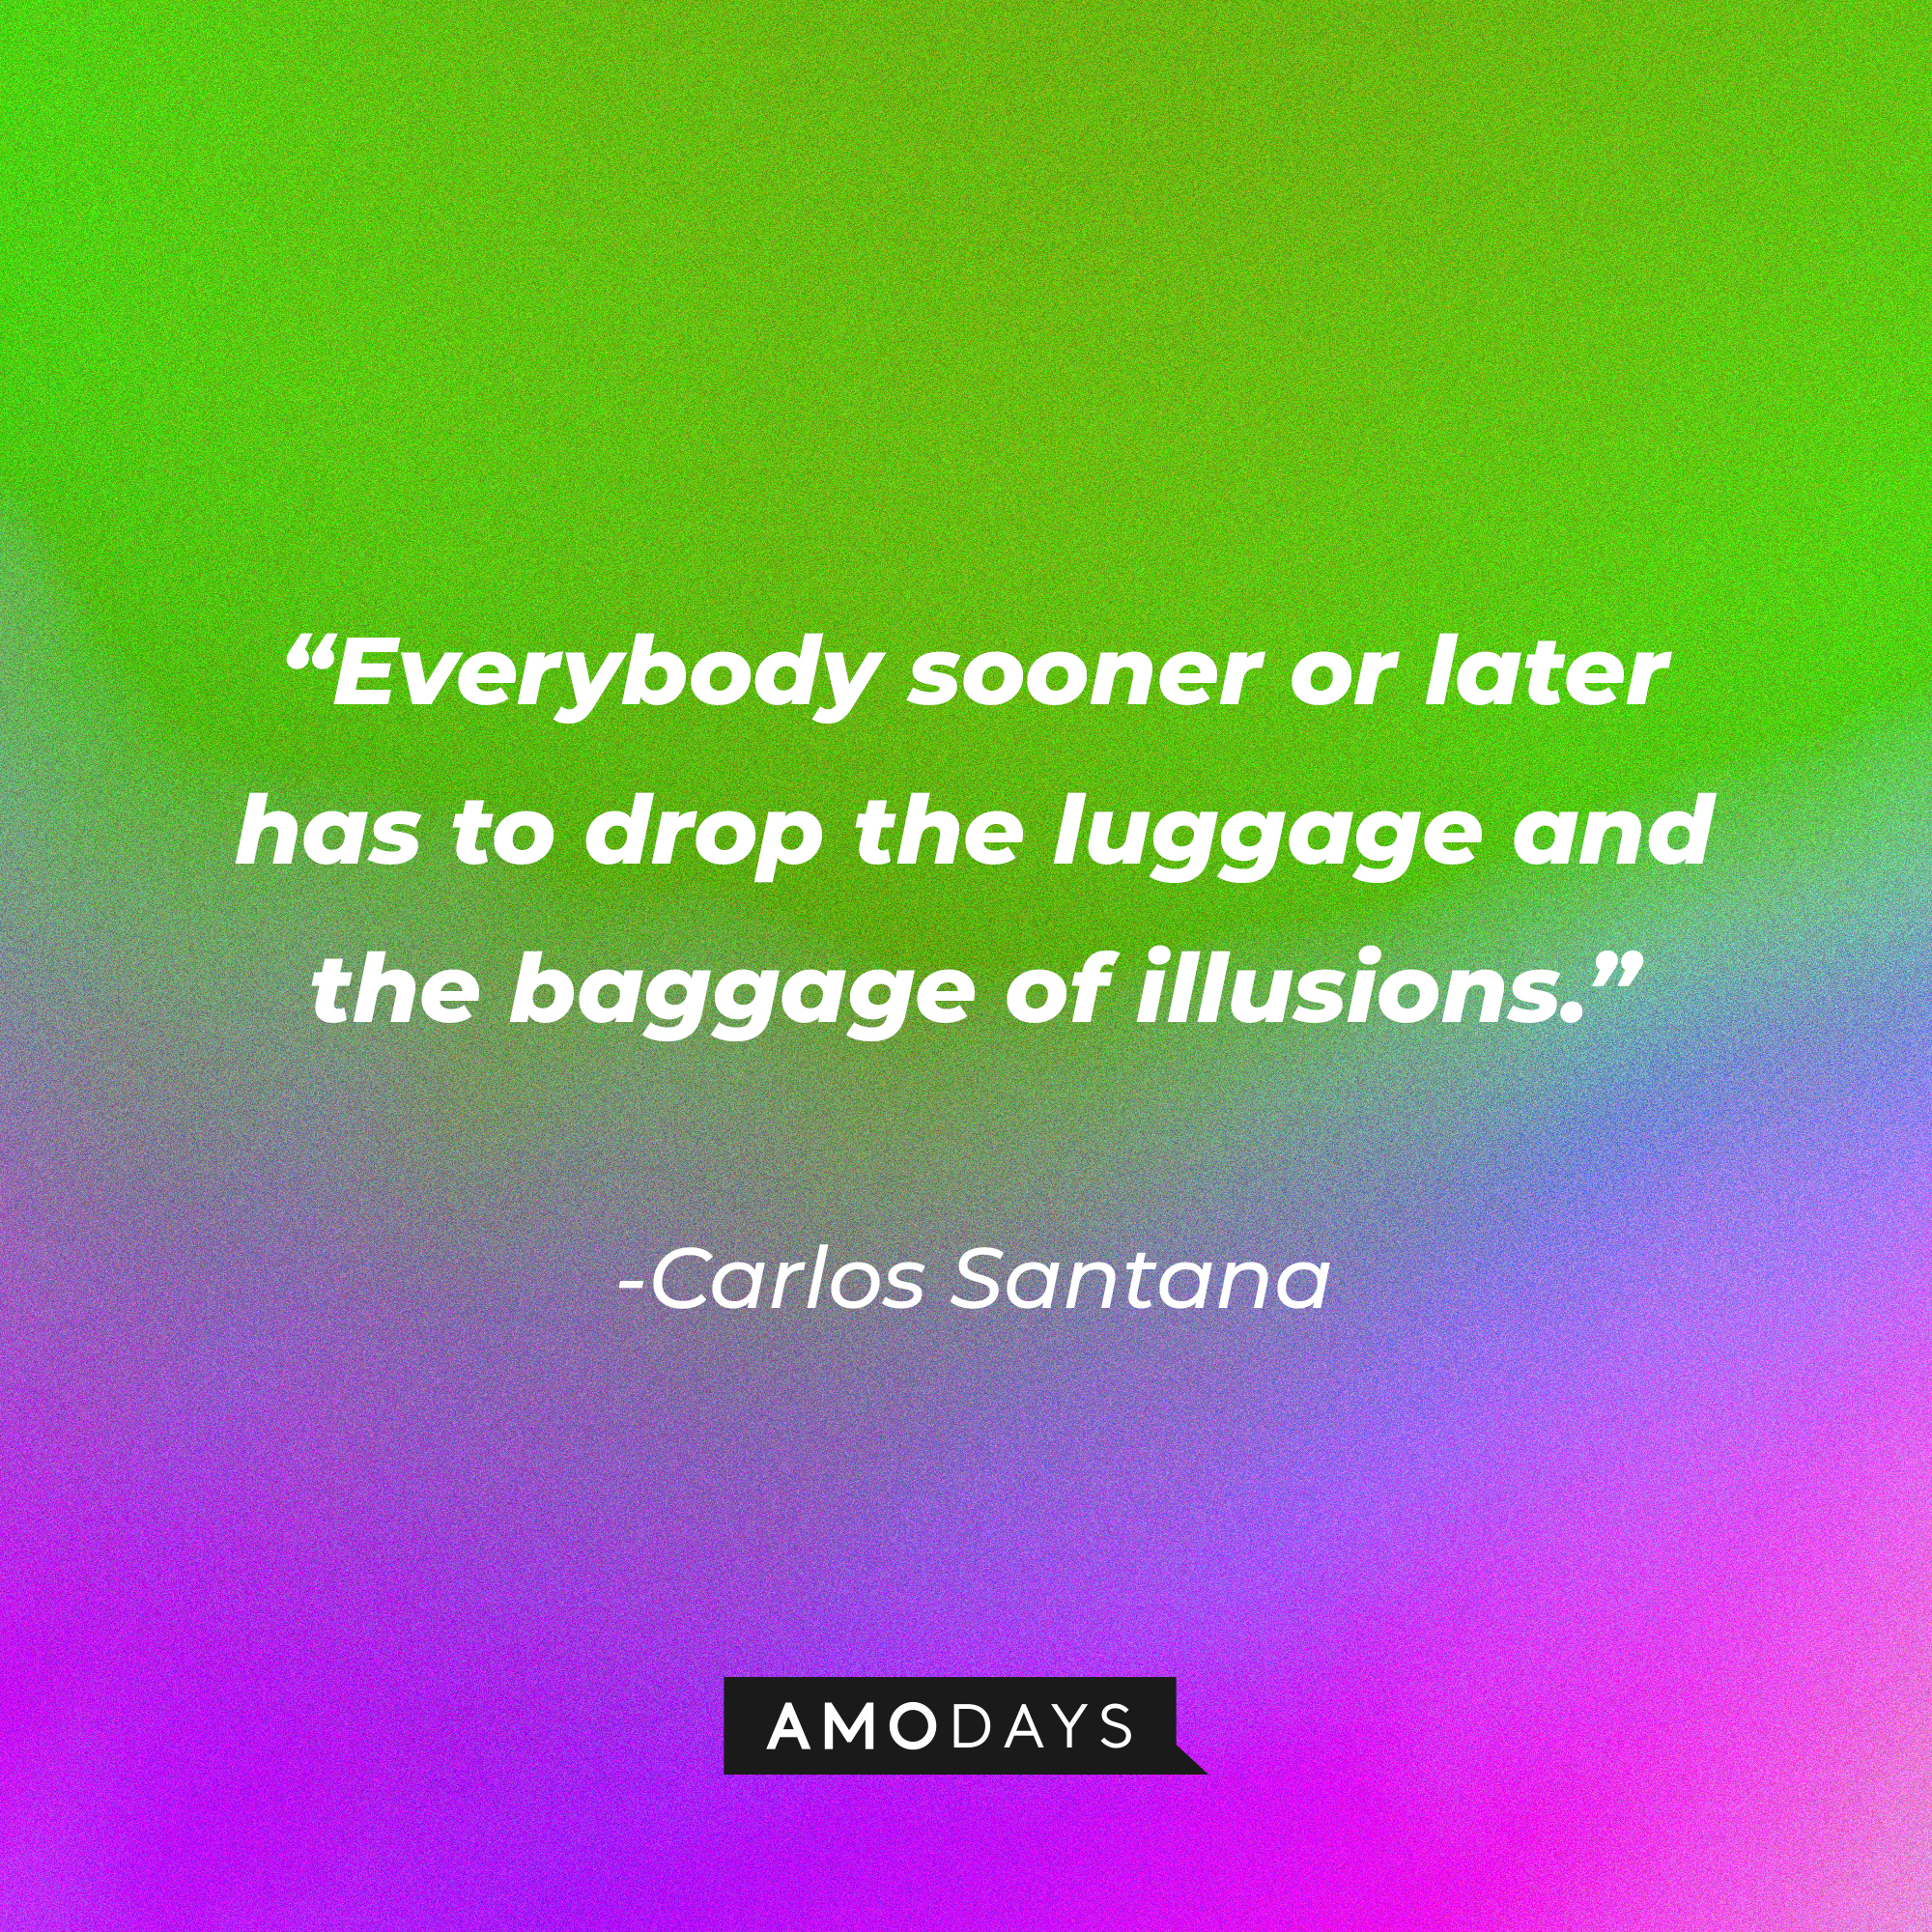 Carlos Santana’s quote: “Everybody sooner or later has to drop the luggage and the baggage of illusions.”┃Source: AmoDays